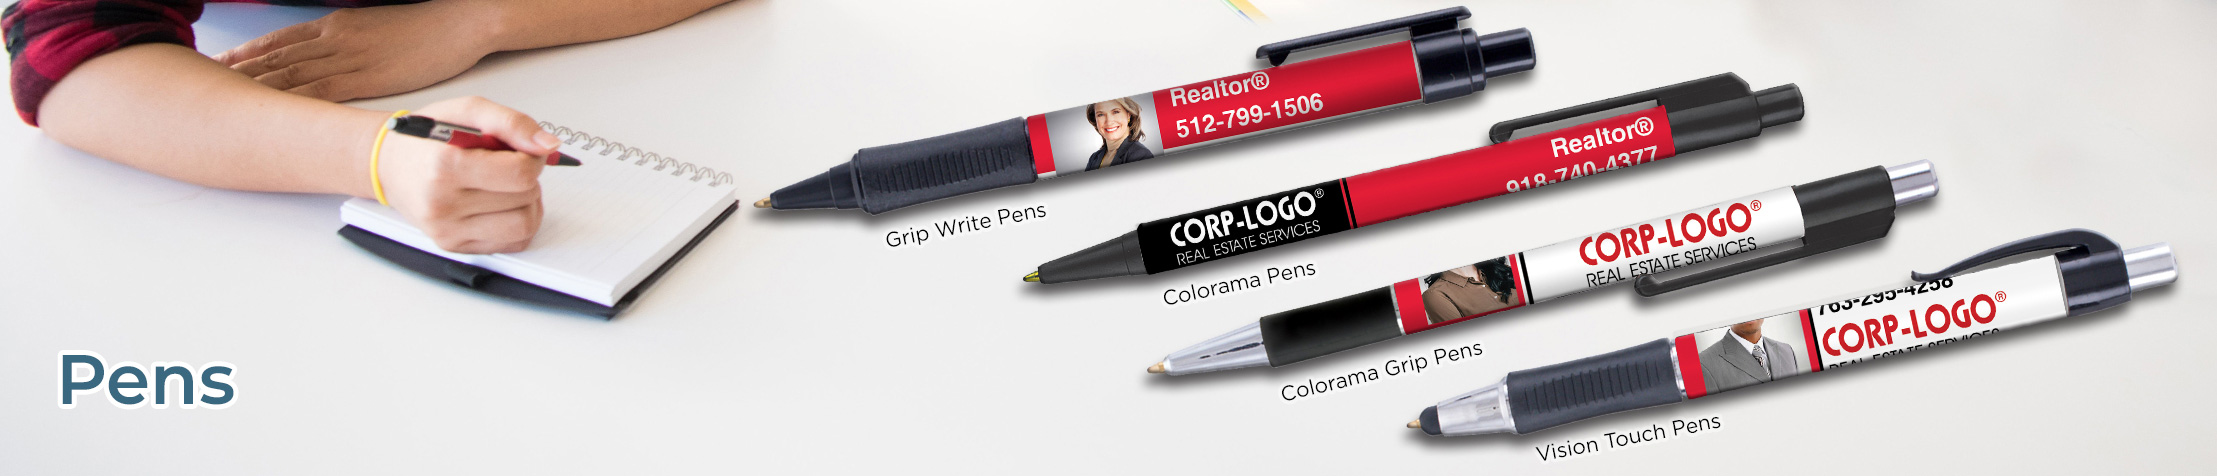 Crye Leike Real Estate Personalized Pens - promotional products: Grip Write Pens, Colorama Pens, Vision Touch Pens, and Colorama Grip Pens | BestPrintBuy.com